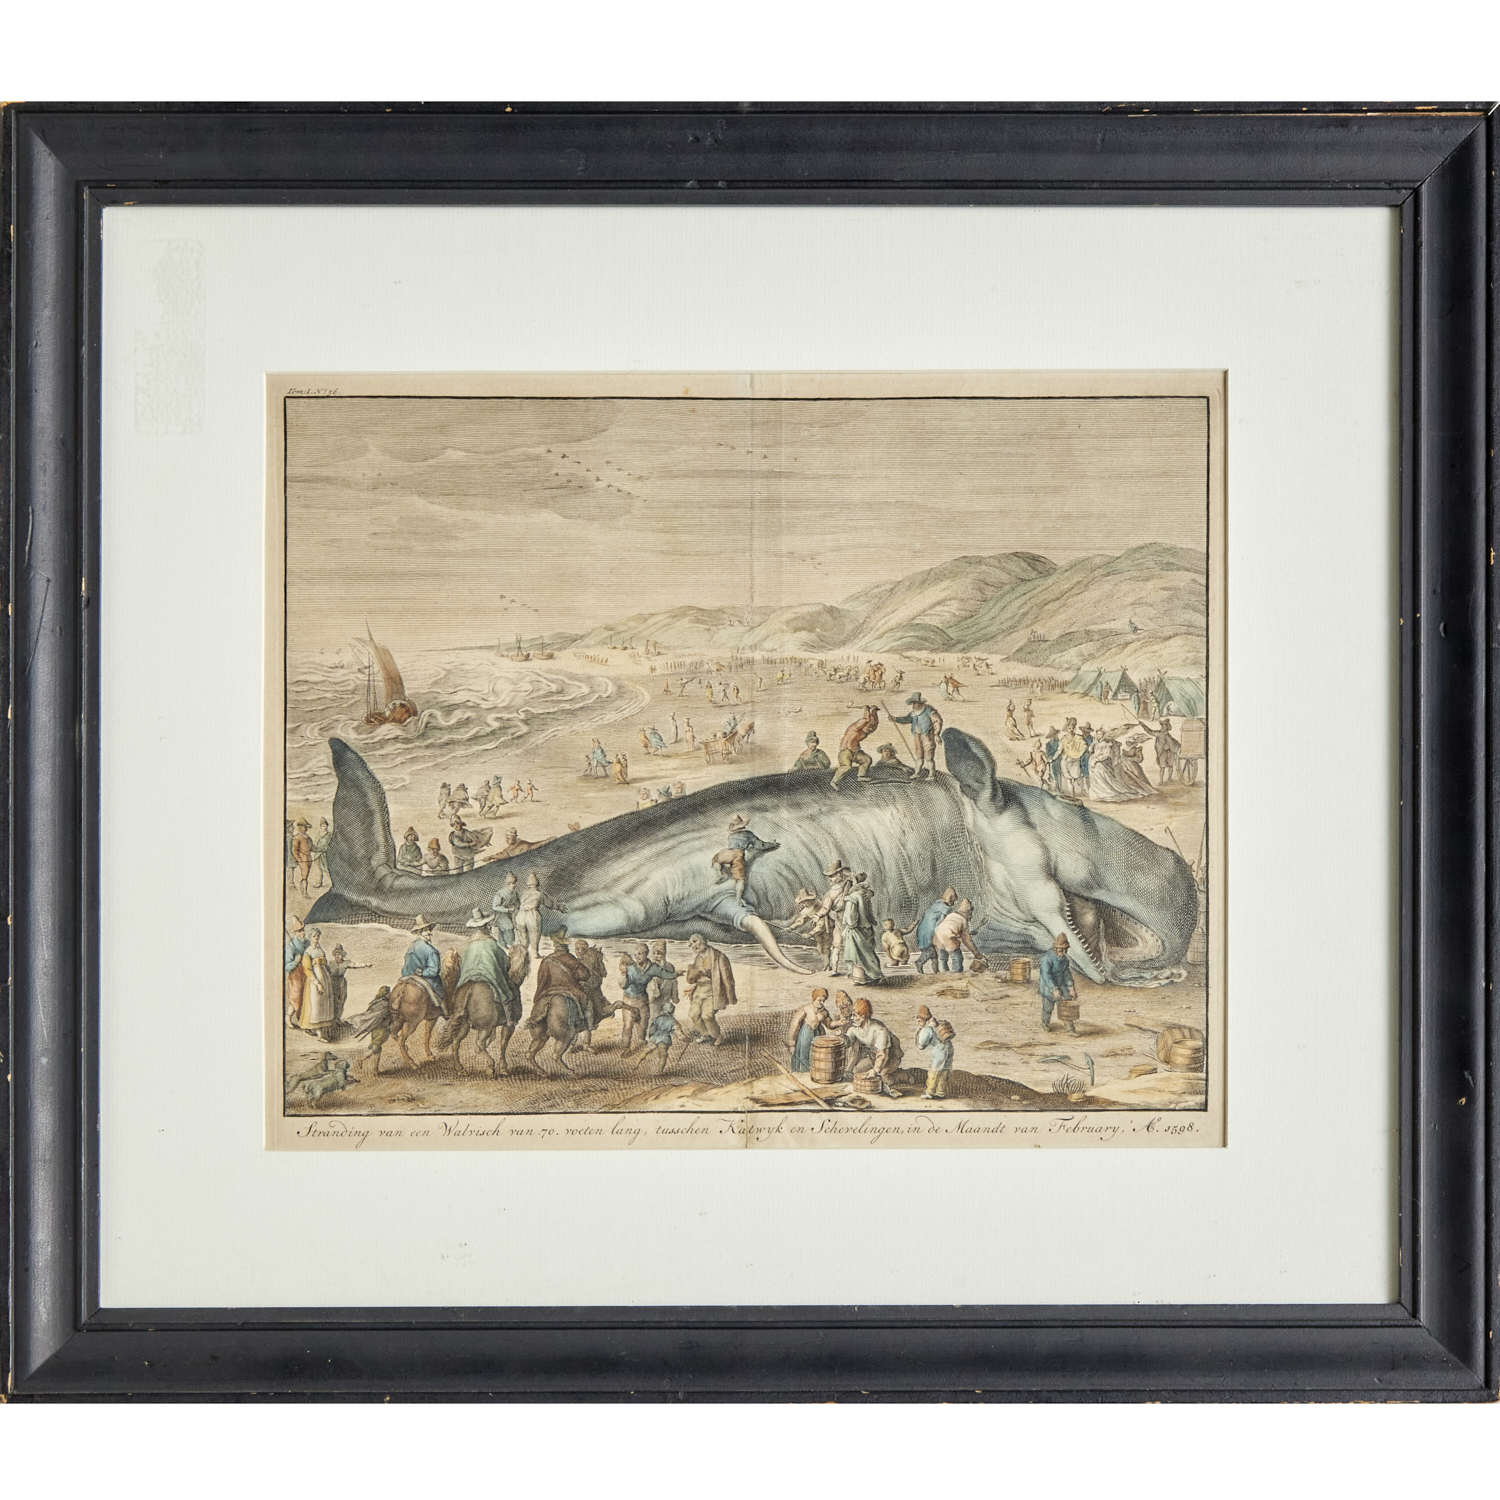  WHALING HAND COLORED ENGRAVING  3b48cb